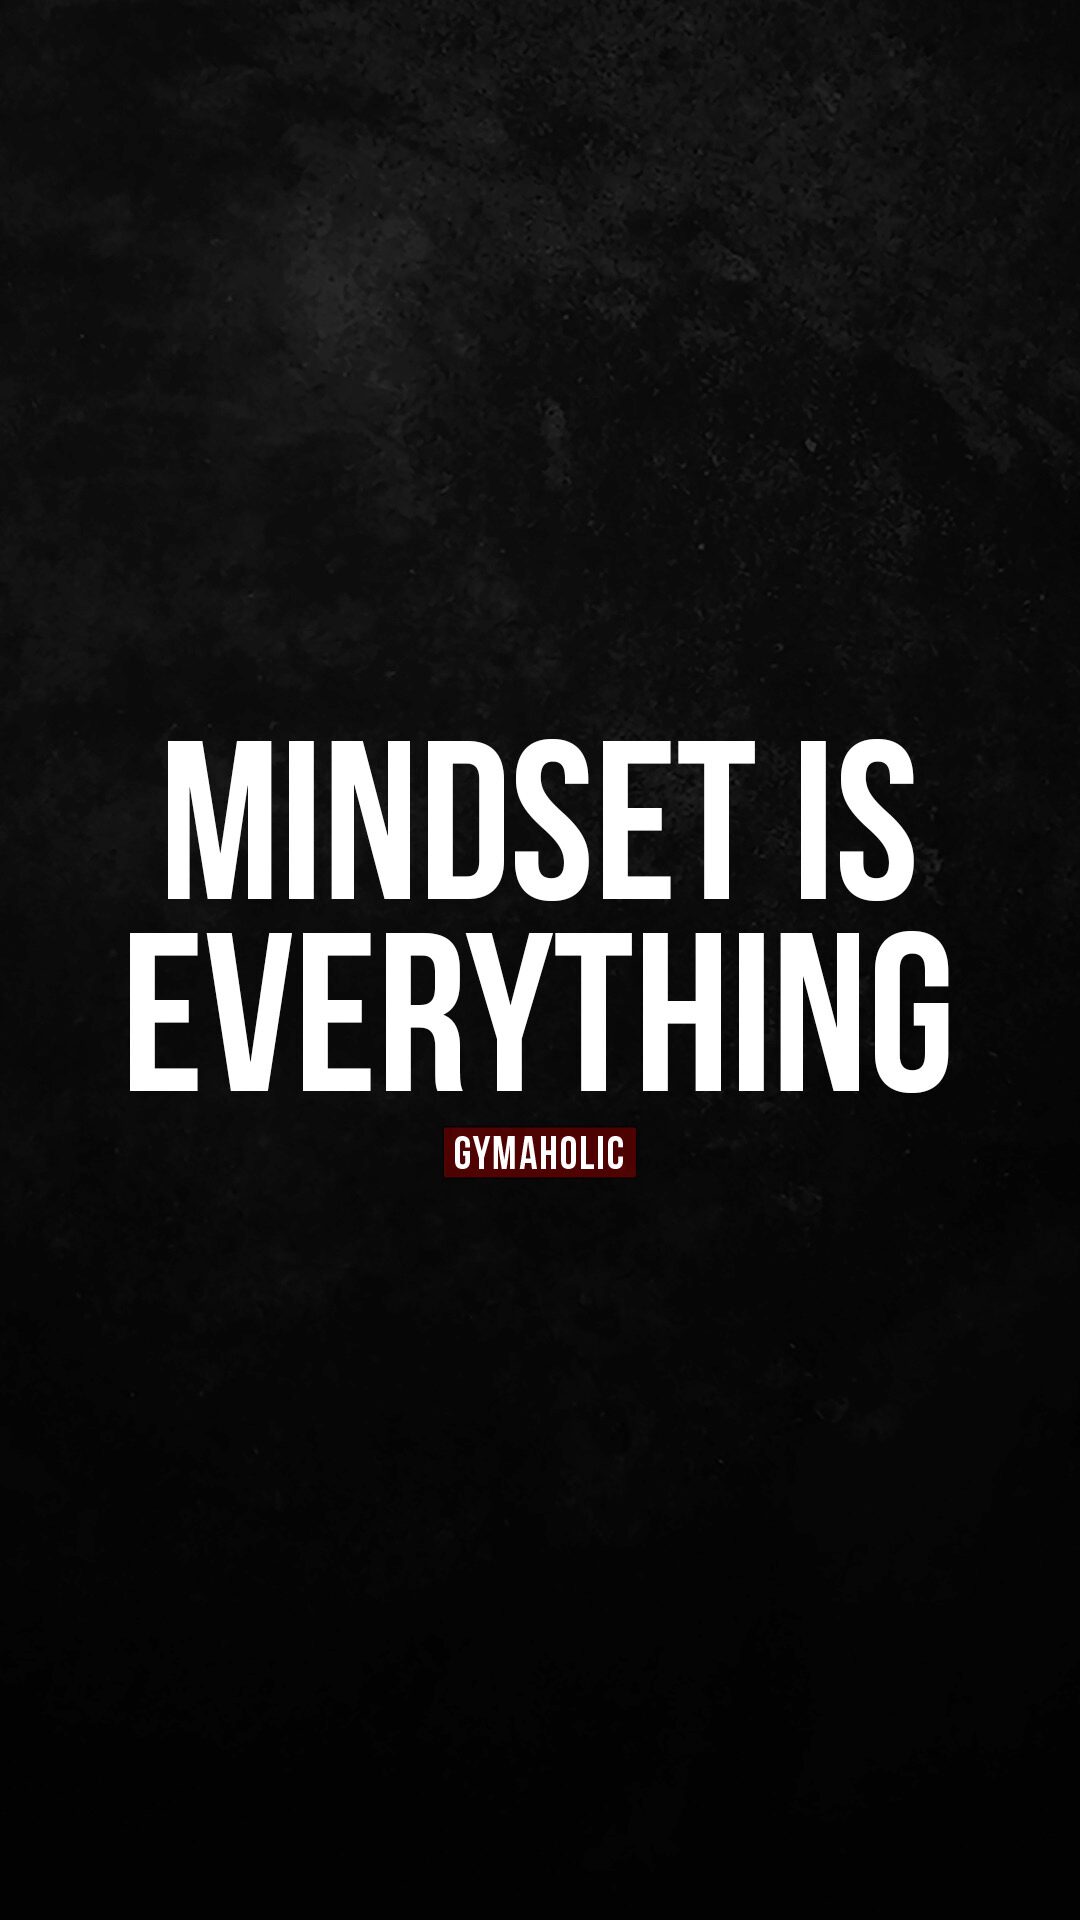 Mindset is everything Fitness App